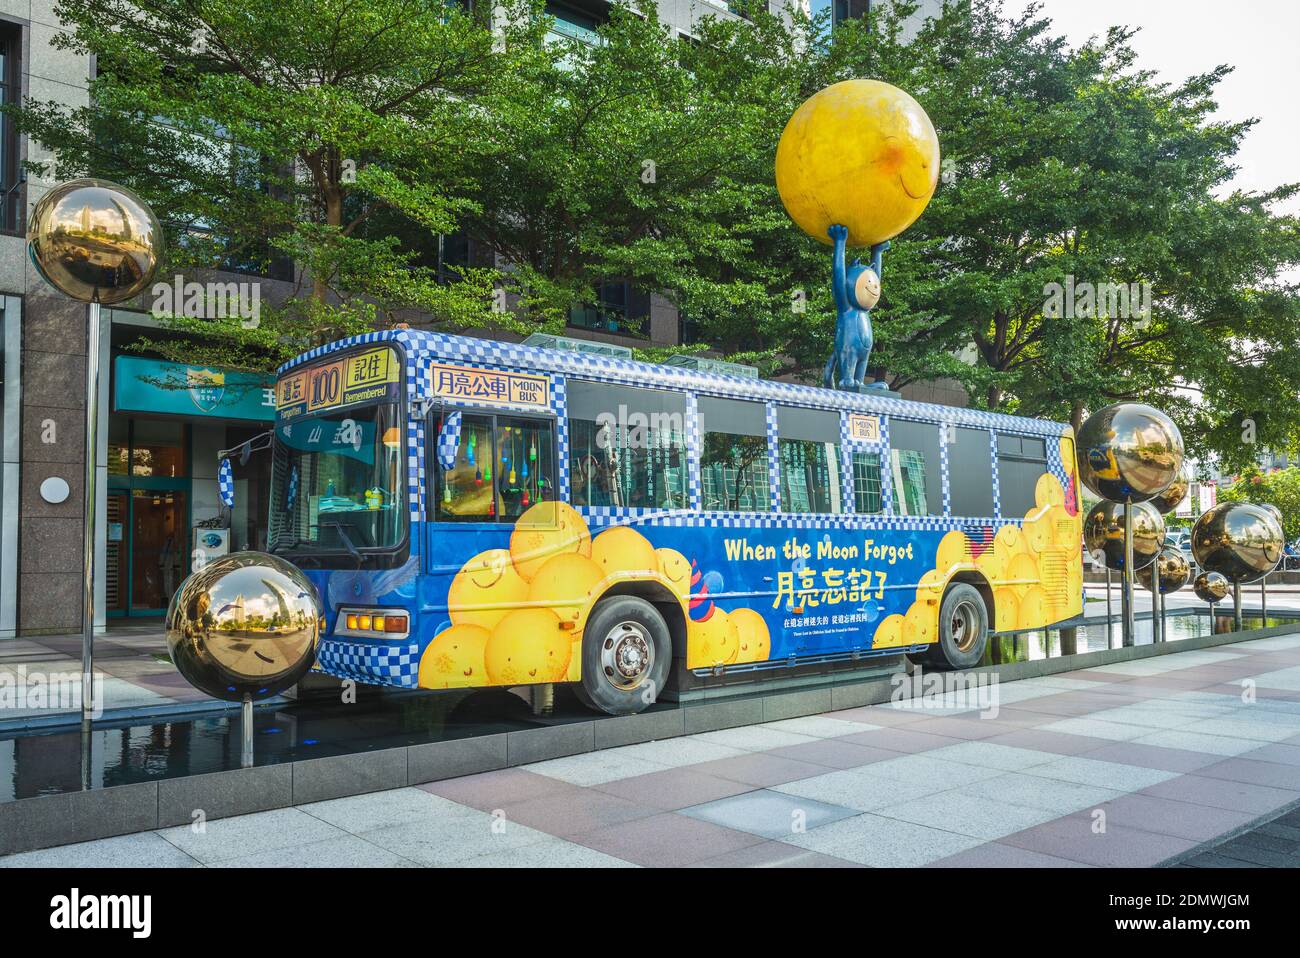 November 1, 2020: The moon bus located near taipei 101 building in xinyi district of taipei city, taiwan. It was based on Taiwanese illustrator Jimmy Stock Photo